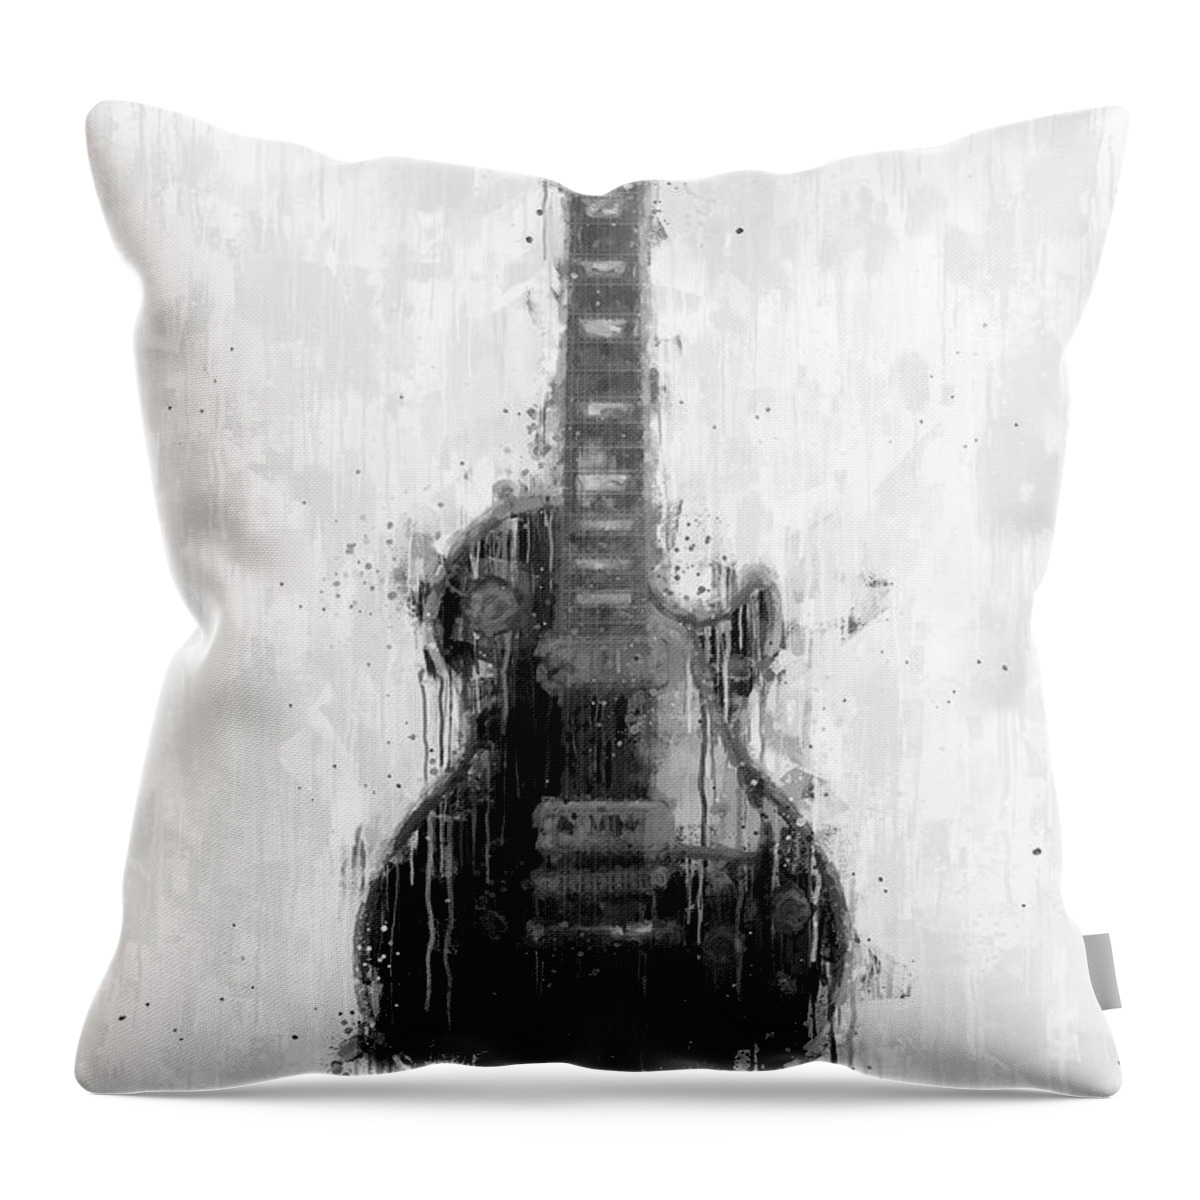 Guitar Throw Pillow featuring the digital art While My Guitar Gently Weeps - Black and White by Nikki Marie Smith